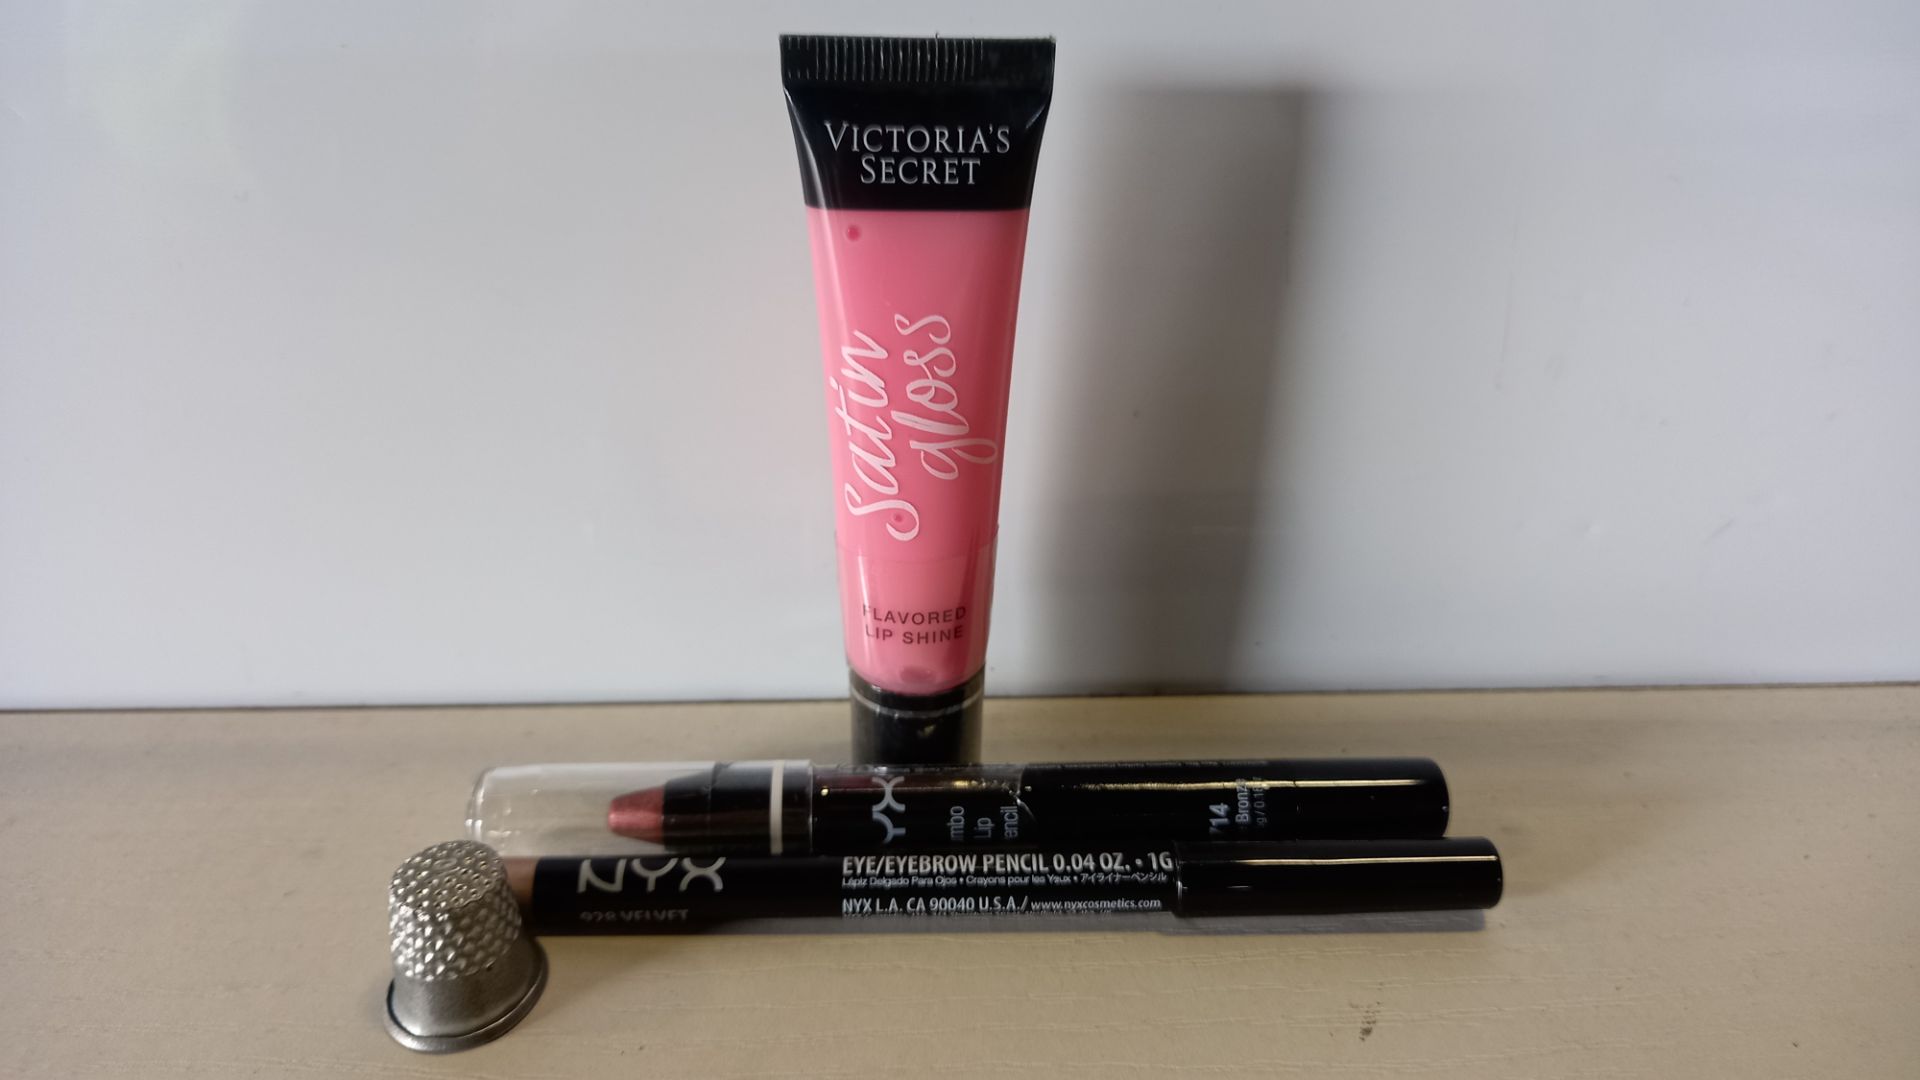 58 PIECE BRAND NEW ASSORTED MAKEUP LOT CONTAINING VICTORIAS SECRET FLAVOURED LIP SHINE (CANDY),